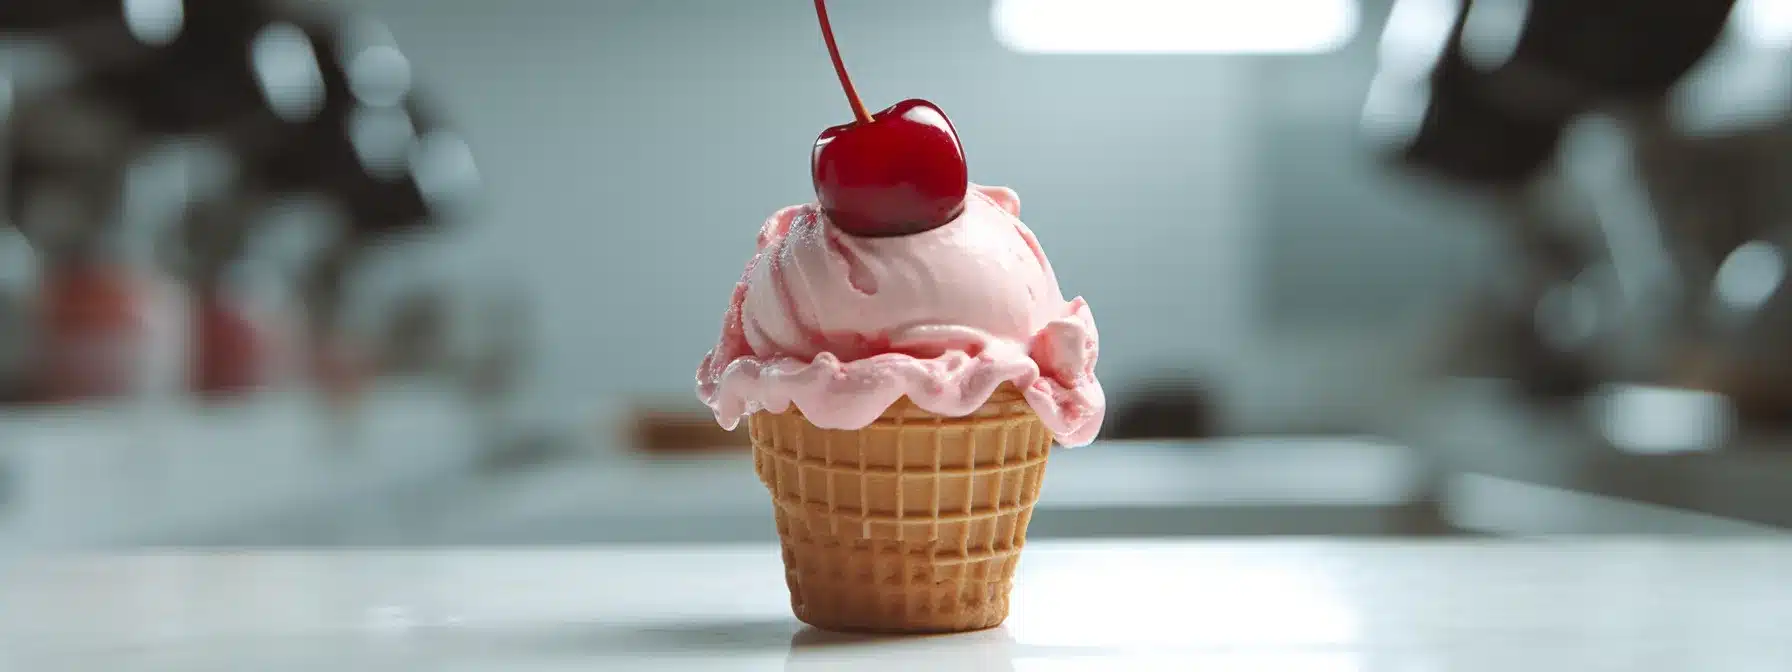 A Scoop Of Ice Cream With A Cherry On Top Sitting On A Plain White Canvas.